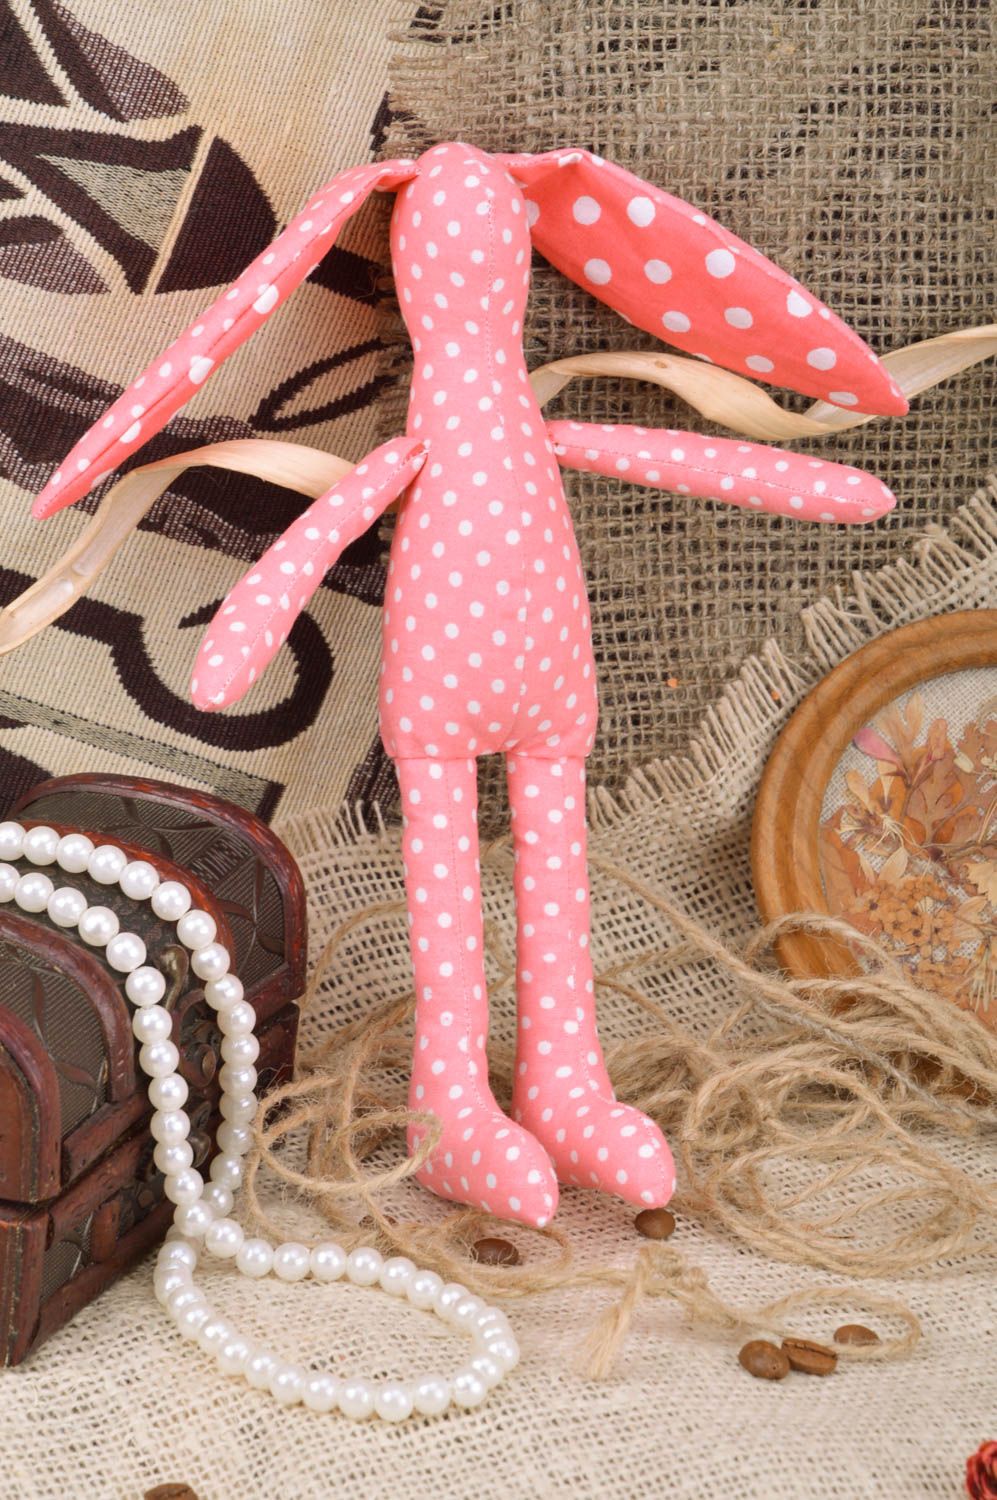 Handmade decorative pink soft toy cotton bunny with polka dot pattern home decor photo 1